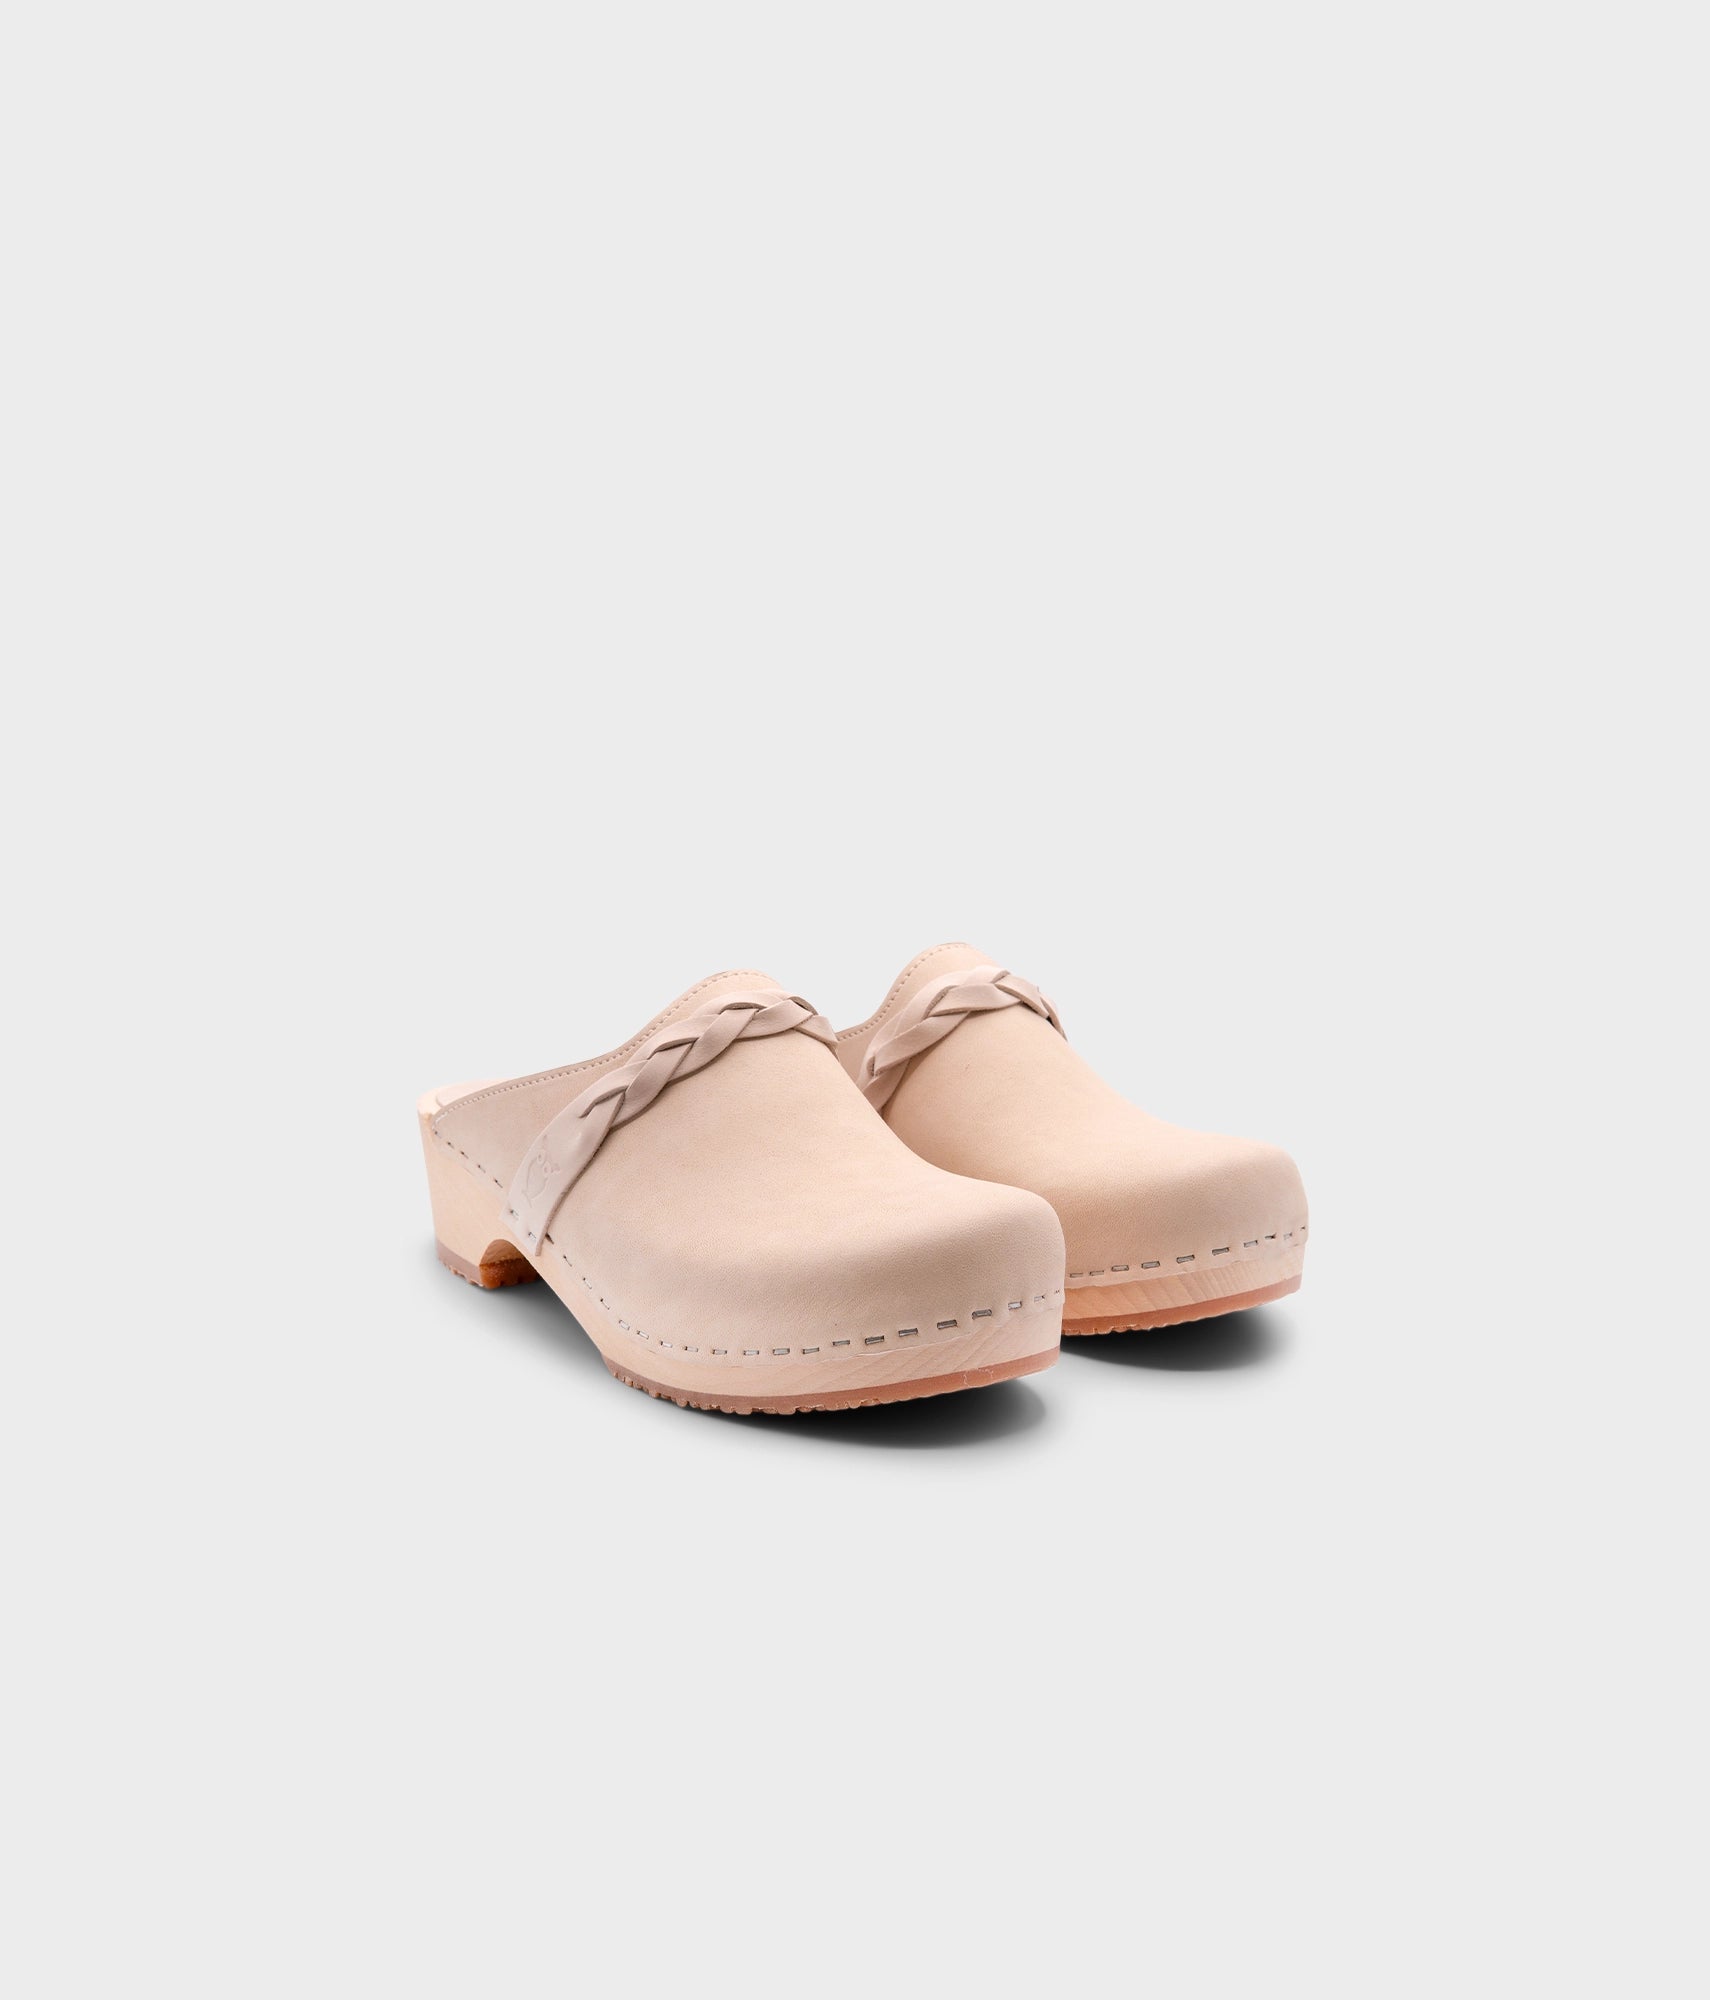 low heeled clog mules in sand white nubuck leather with a braided strap stapled on a light wooden base